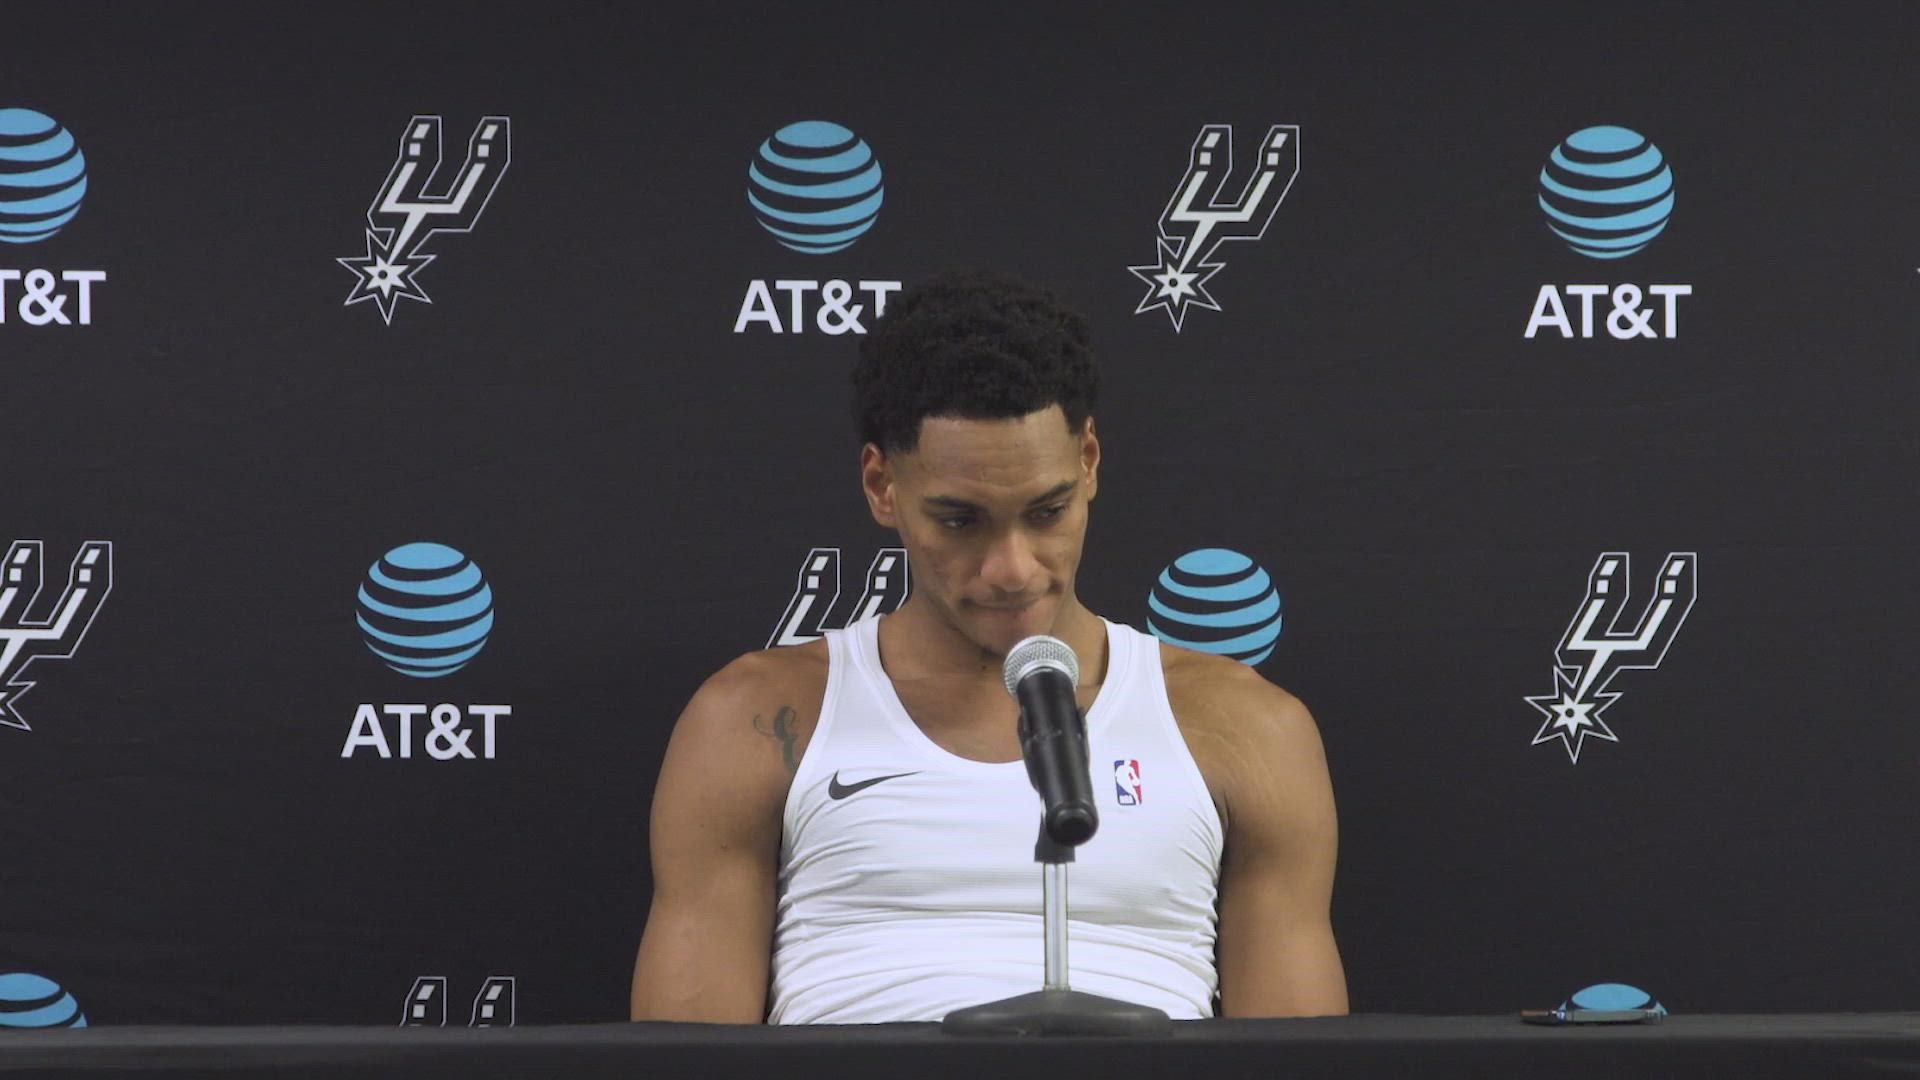 The San Antonio guard says the team needs to work on being more consistent game in and game out as the season goes on.